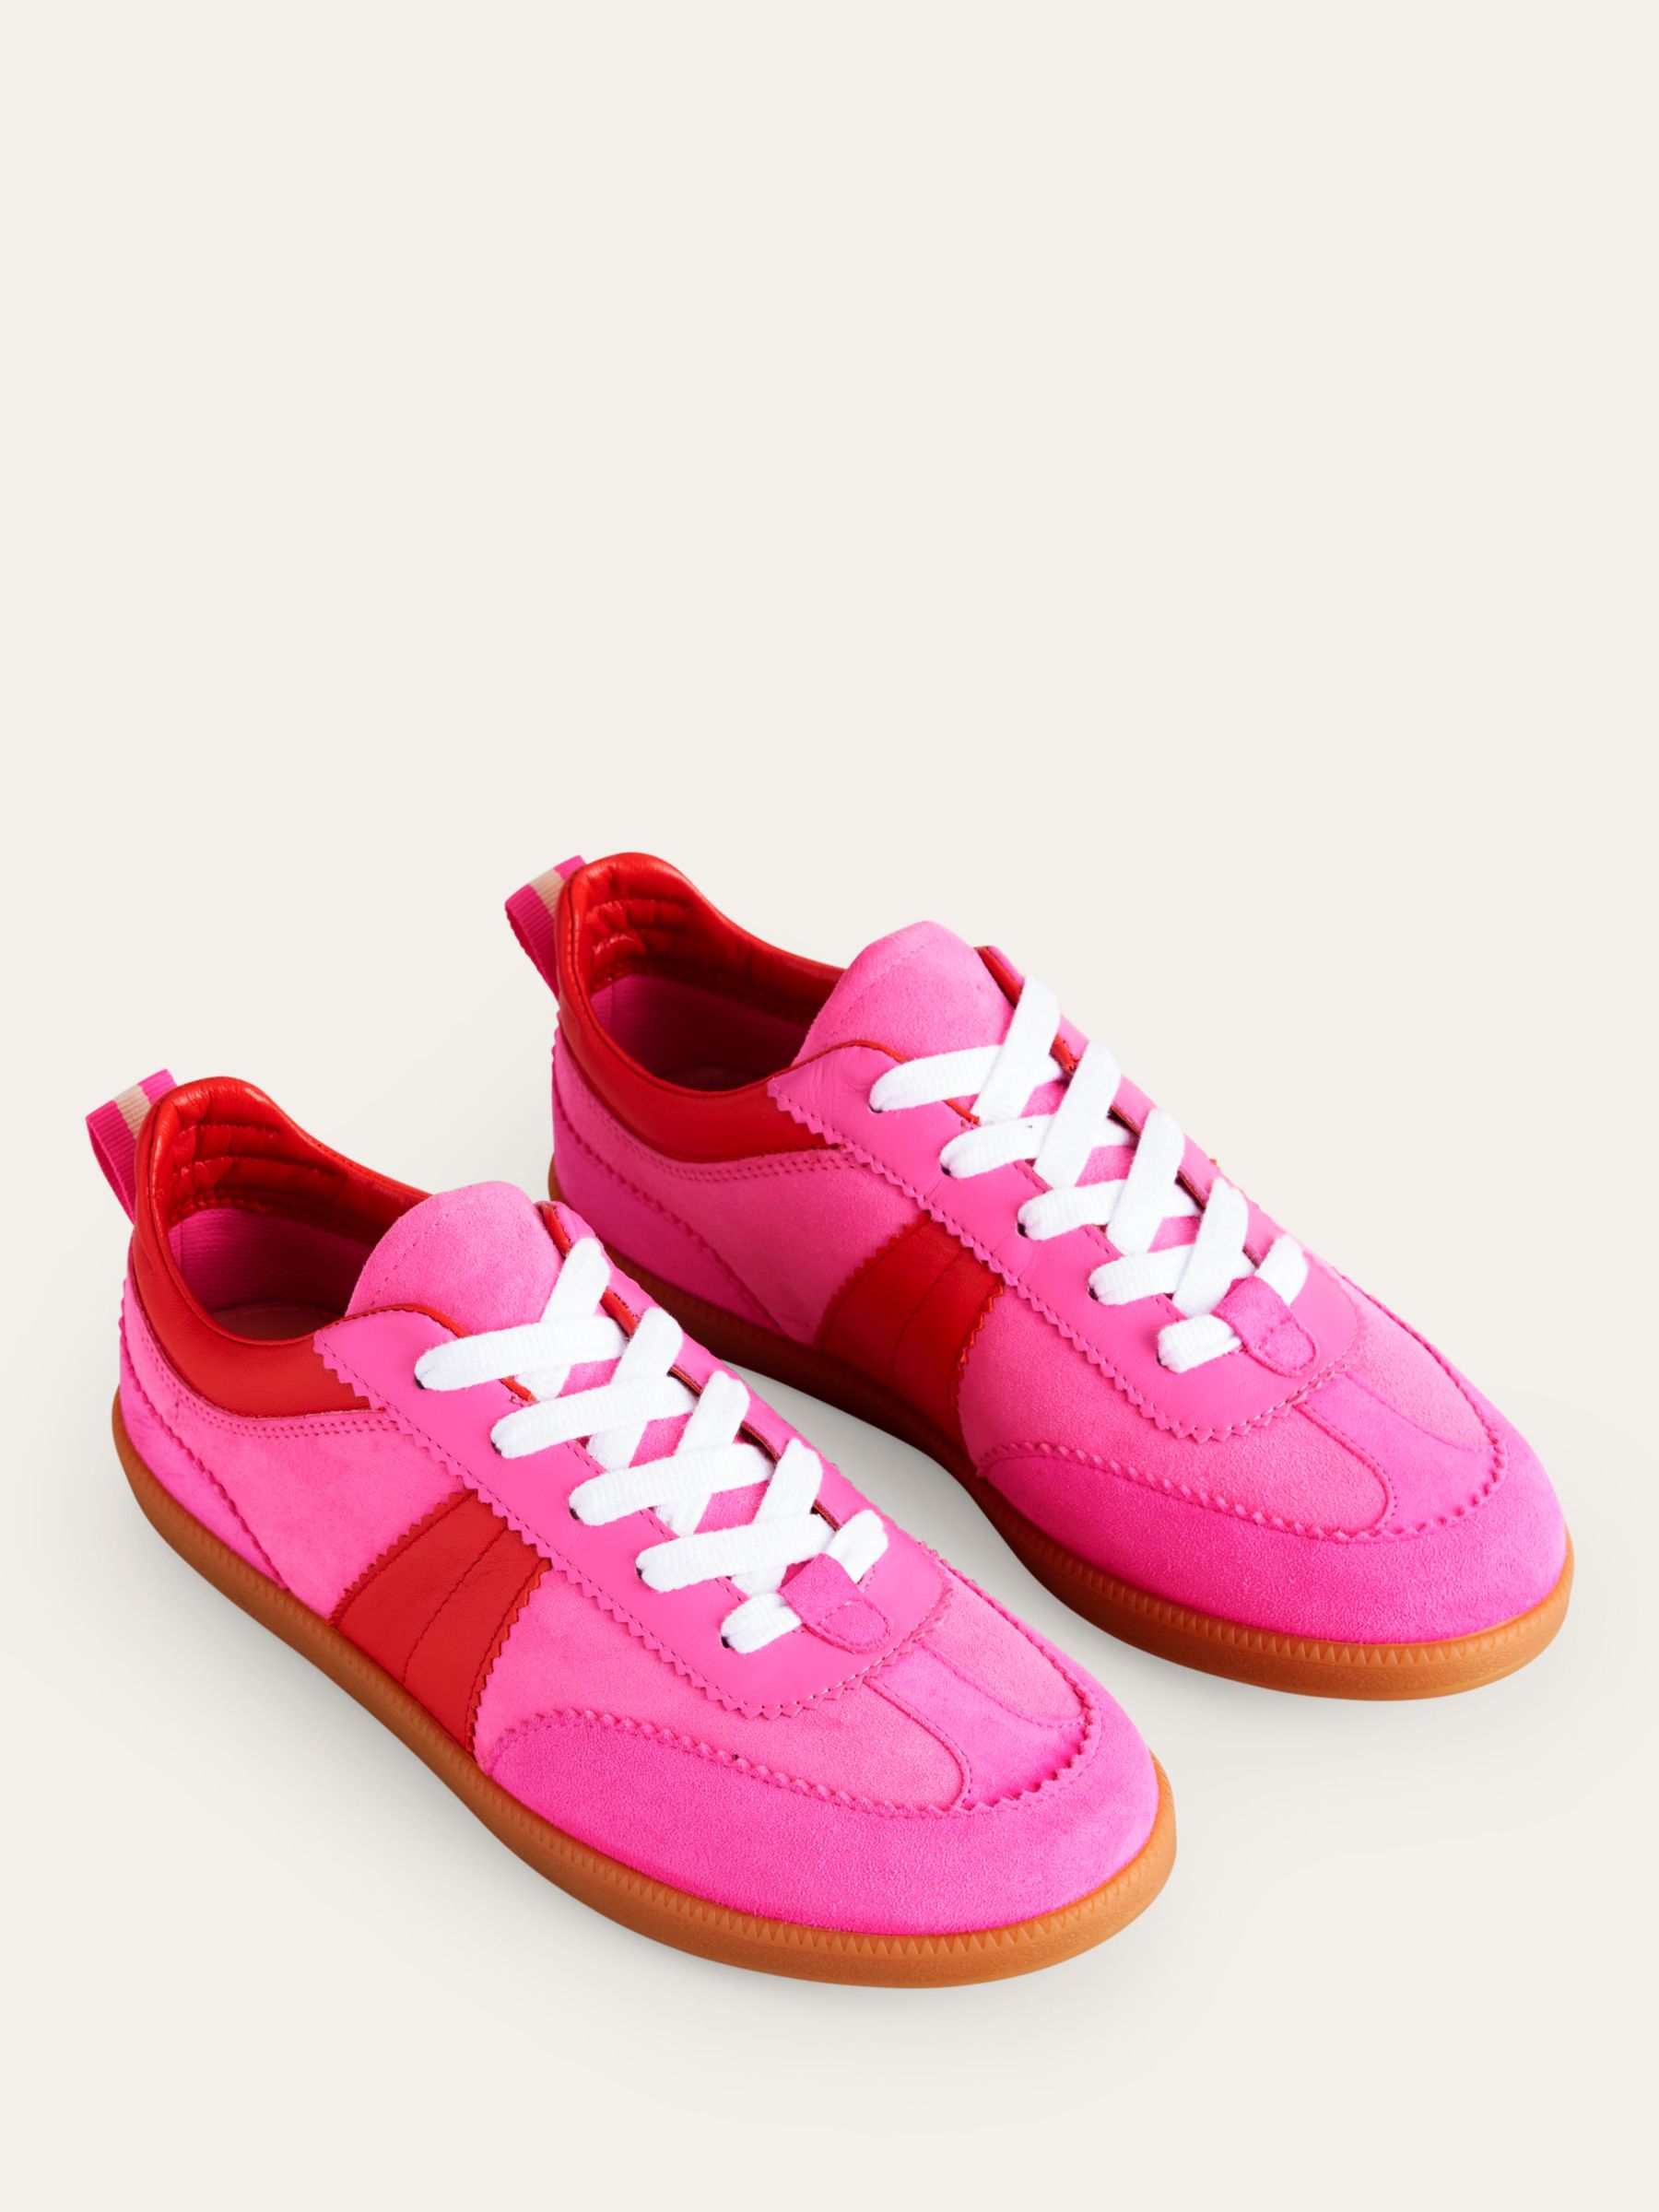 Boden Erin Retro Tennis Trainers, Pink/Red at John Lewis & Partners